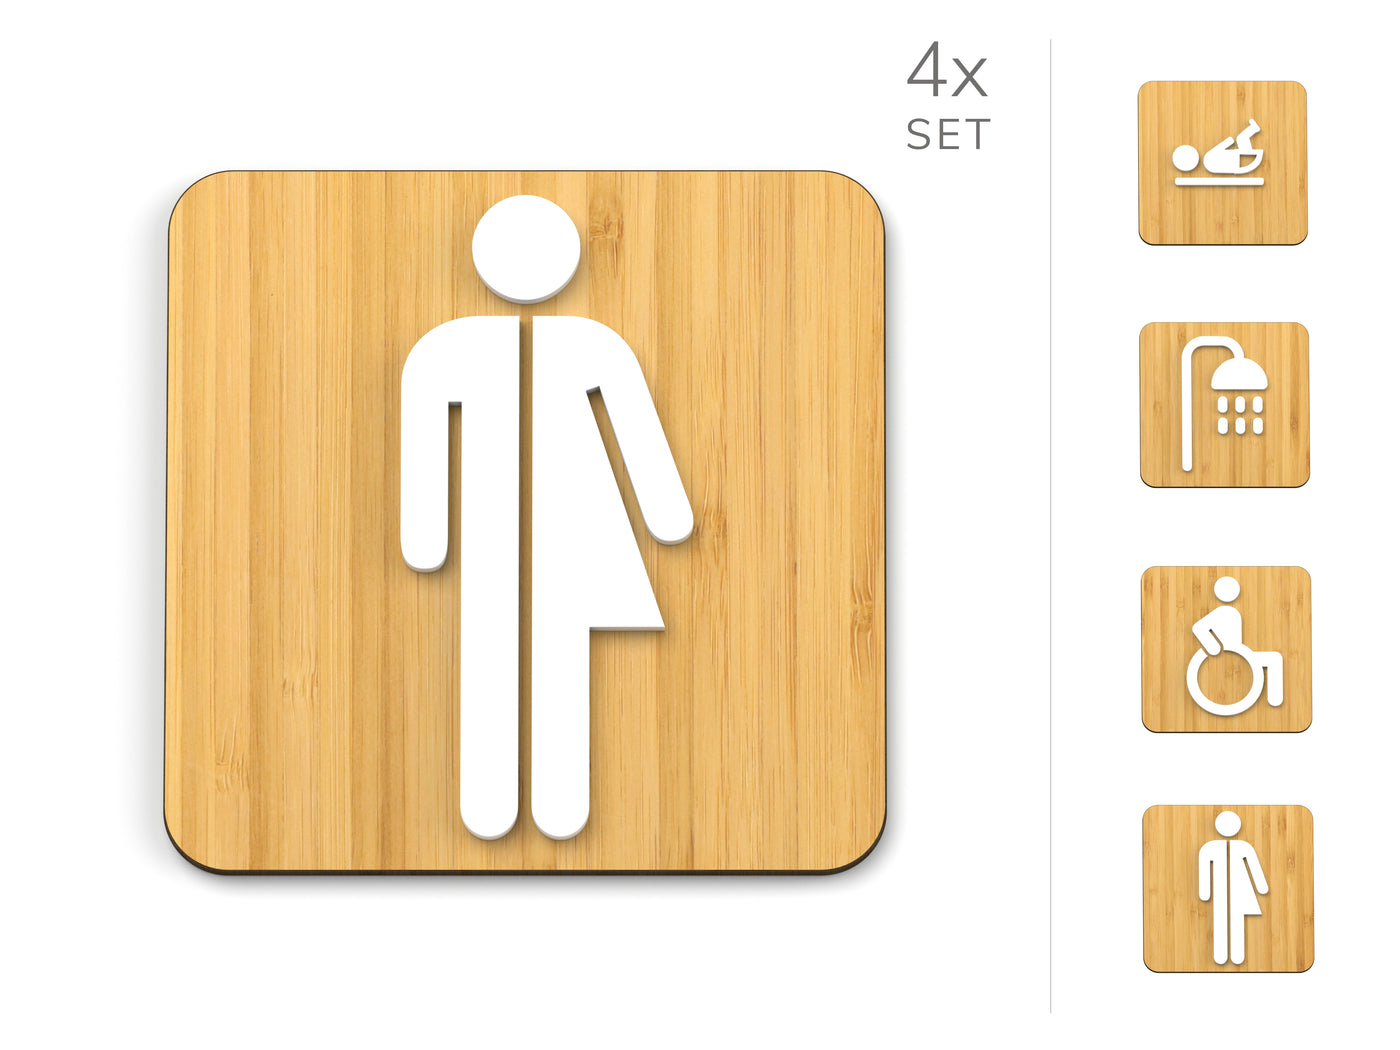 Classic, 4x Square Base - Inclusive Toilet Signs Set - Gender Neutral, Disabled, Nursery, Shower